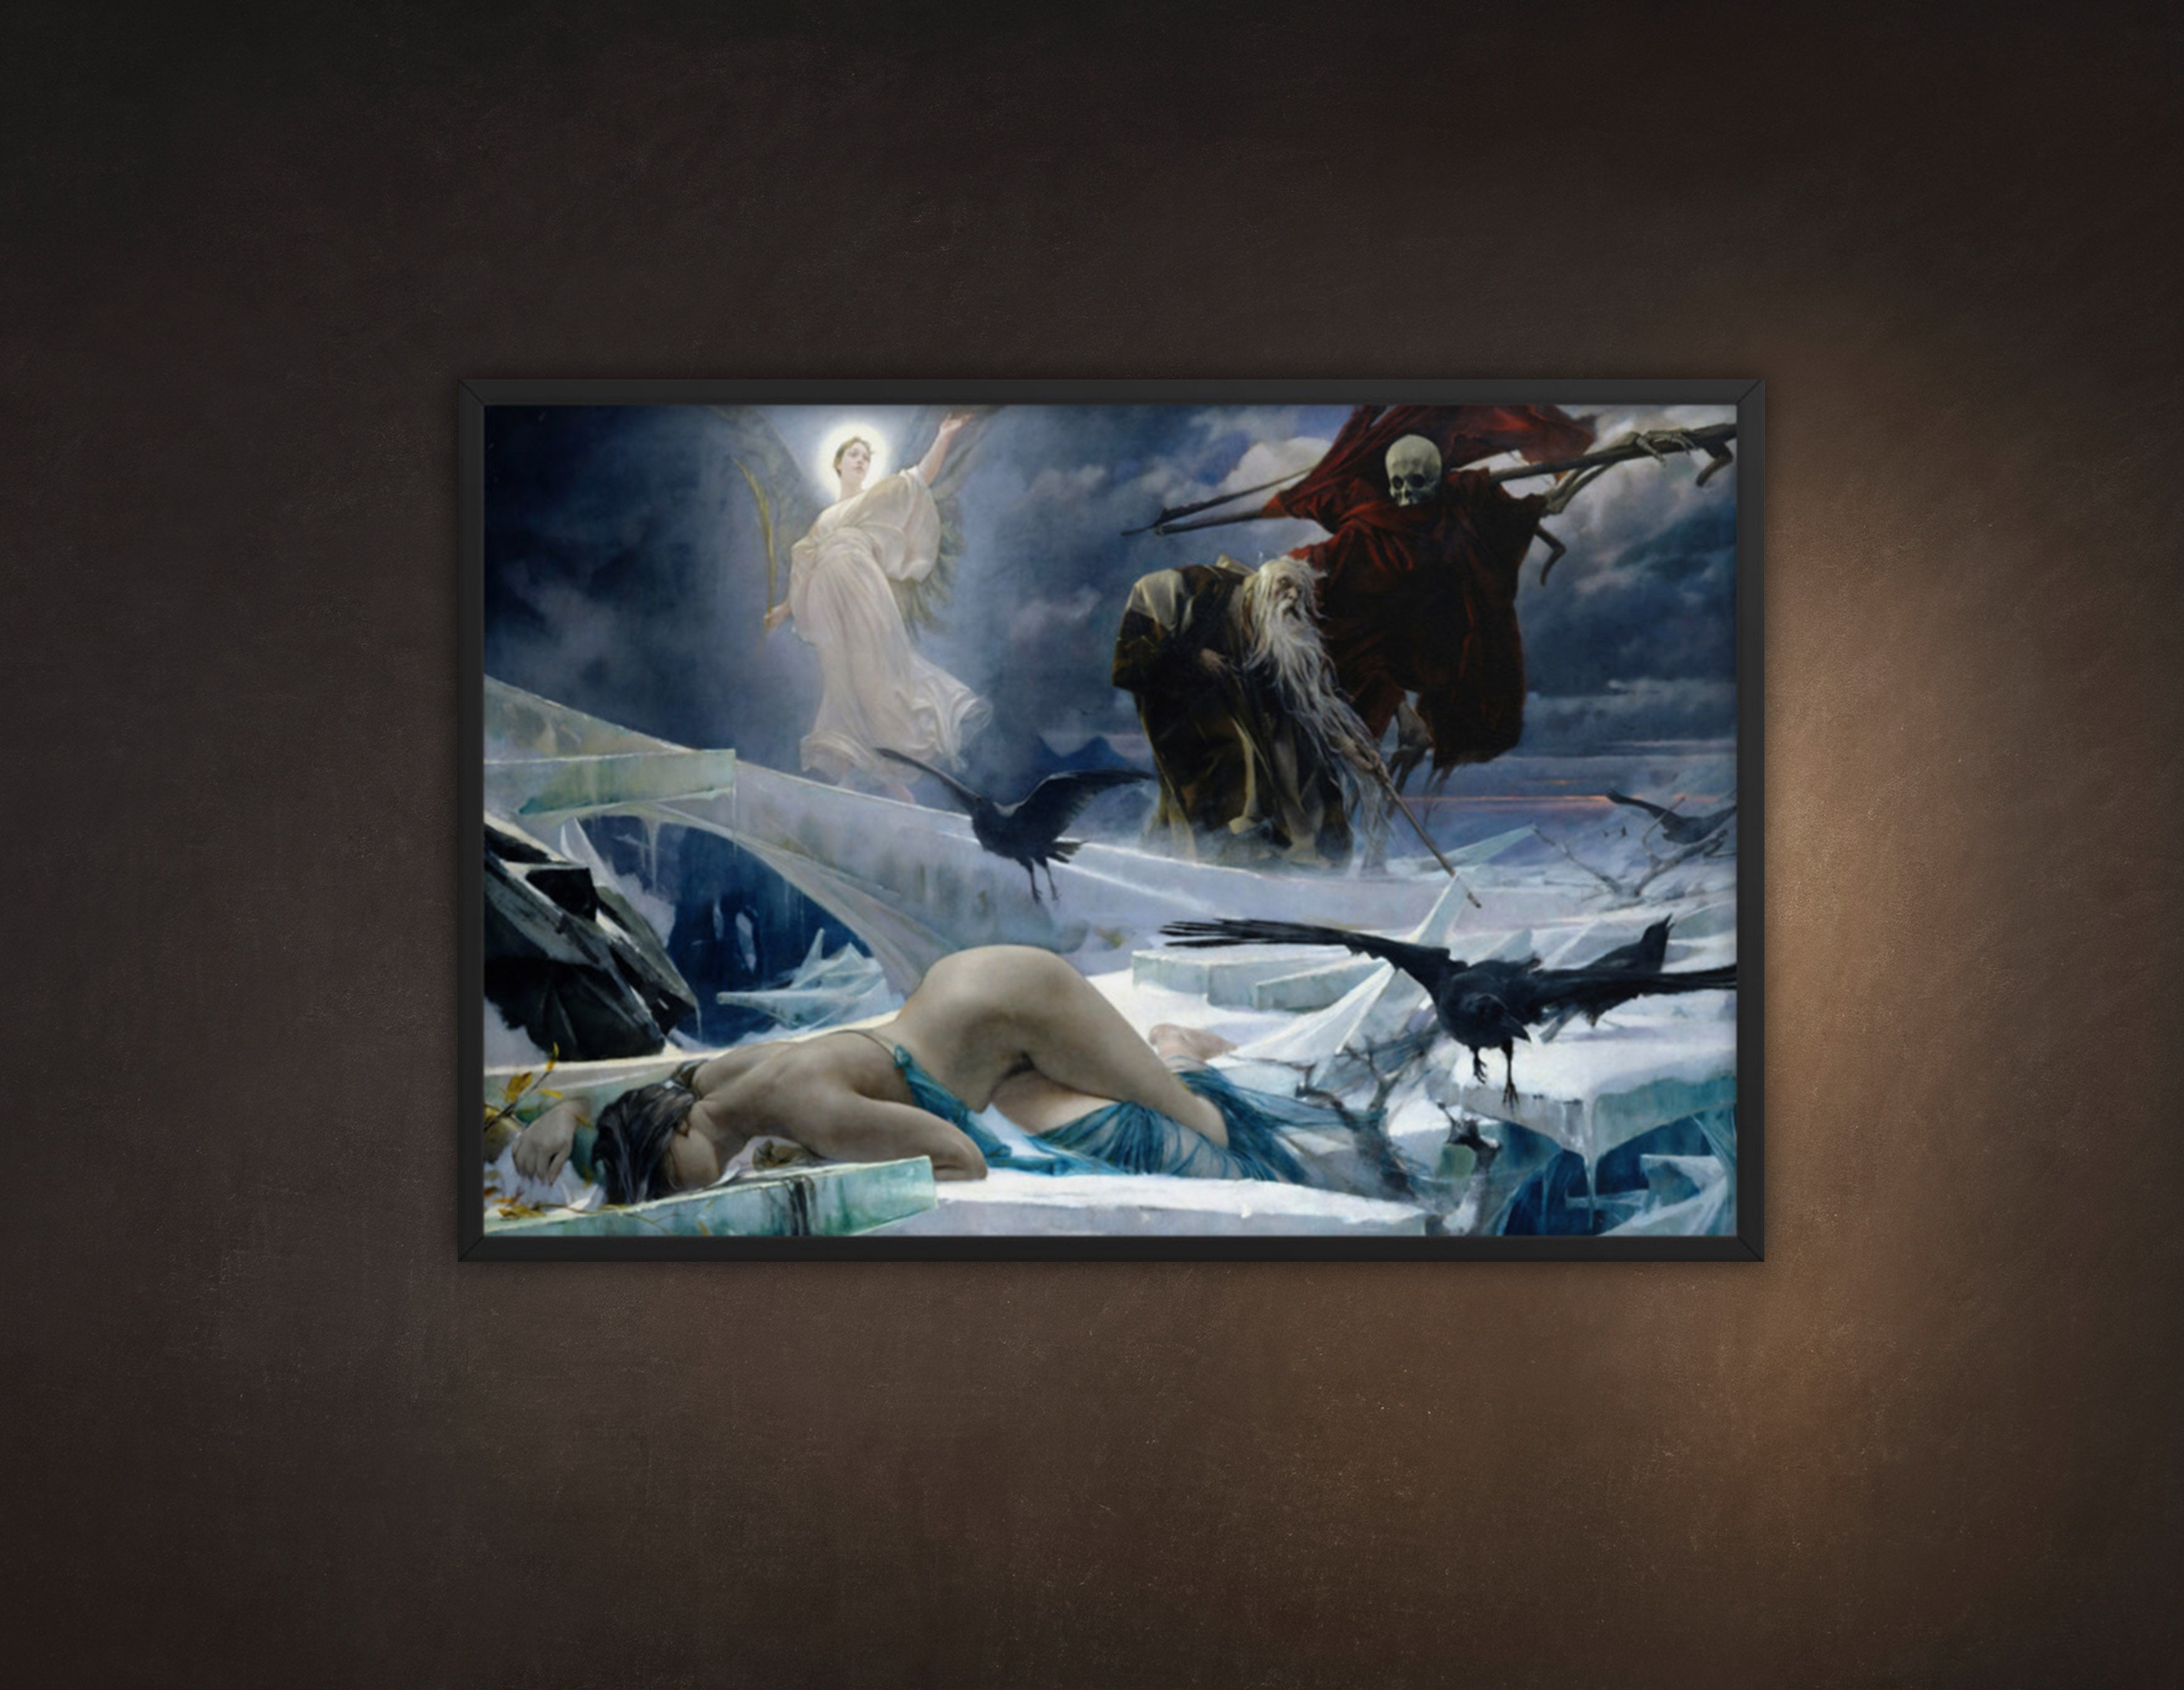 Ahasuerus at the End of the World, by Adolf Hirémy-Hirschl, Framed Art Print Poster, Available in Two Sizes